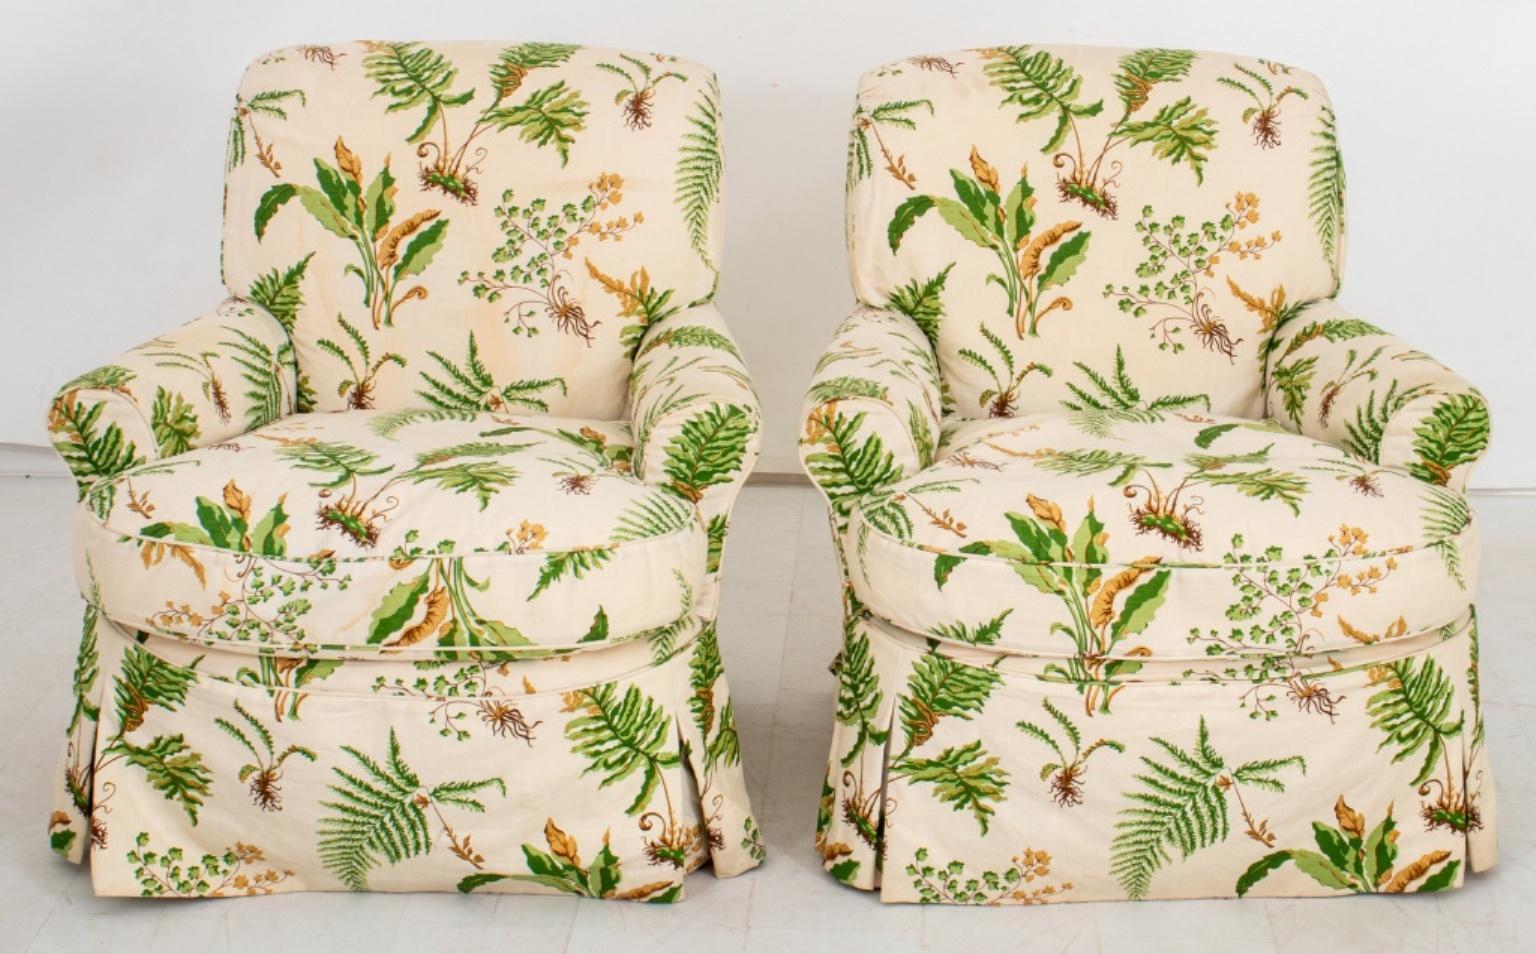 Pair of small club chairs by Parrish-Hadley, covered in Elsie de Wolfe-inspired botanical fern printed cotton linen (light staining). 2, the chairs likley Brunschwig & Fils.

Dimensions: 31